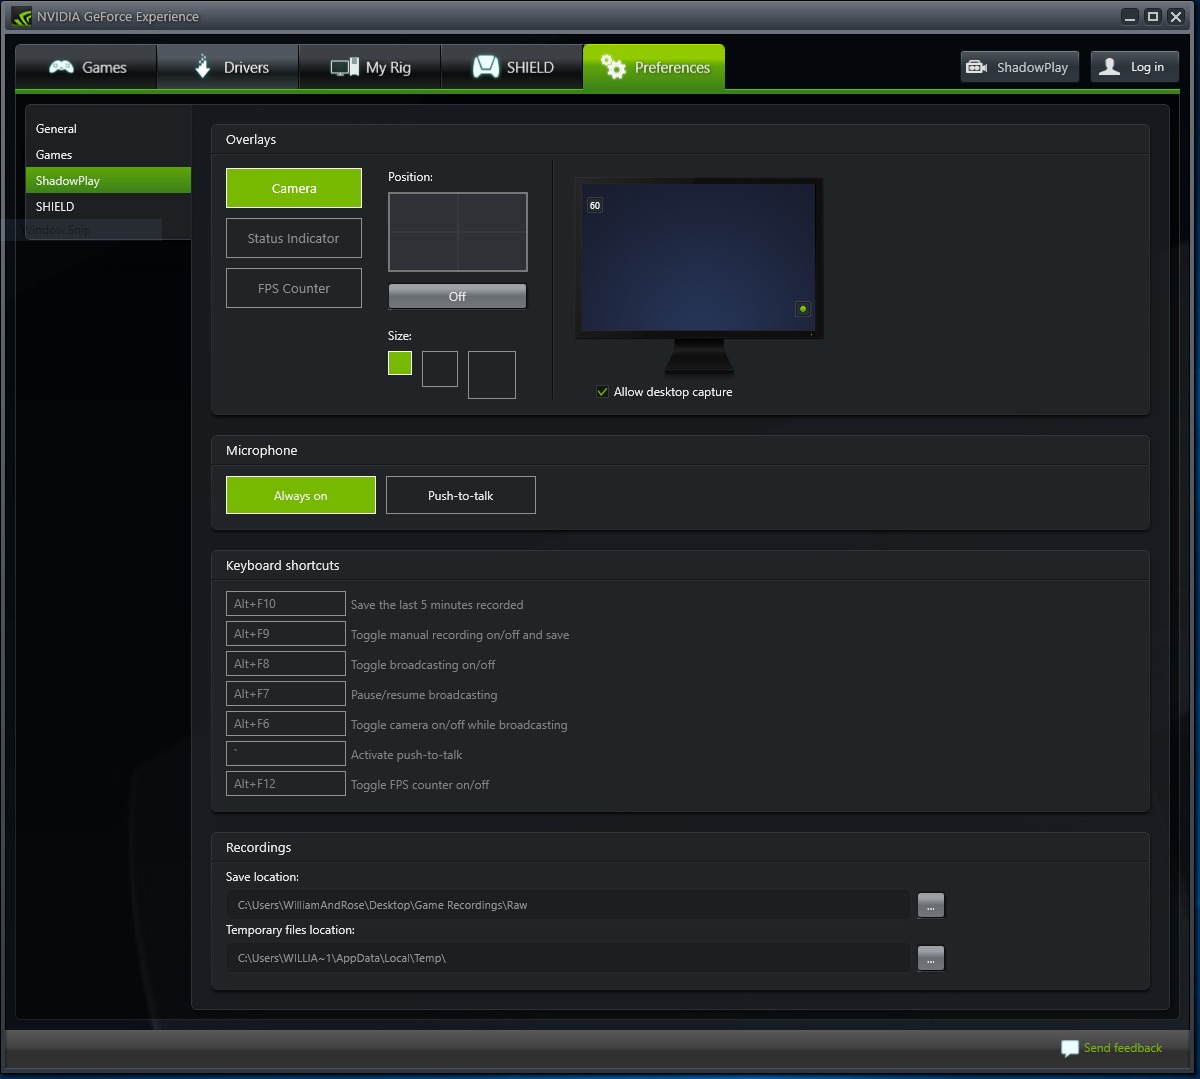 GeForce Experience - Preferences Tab